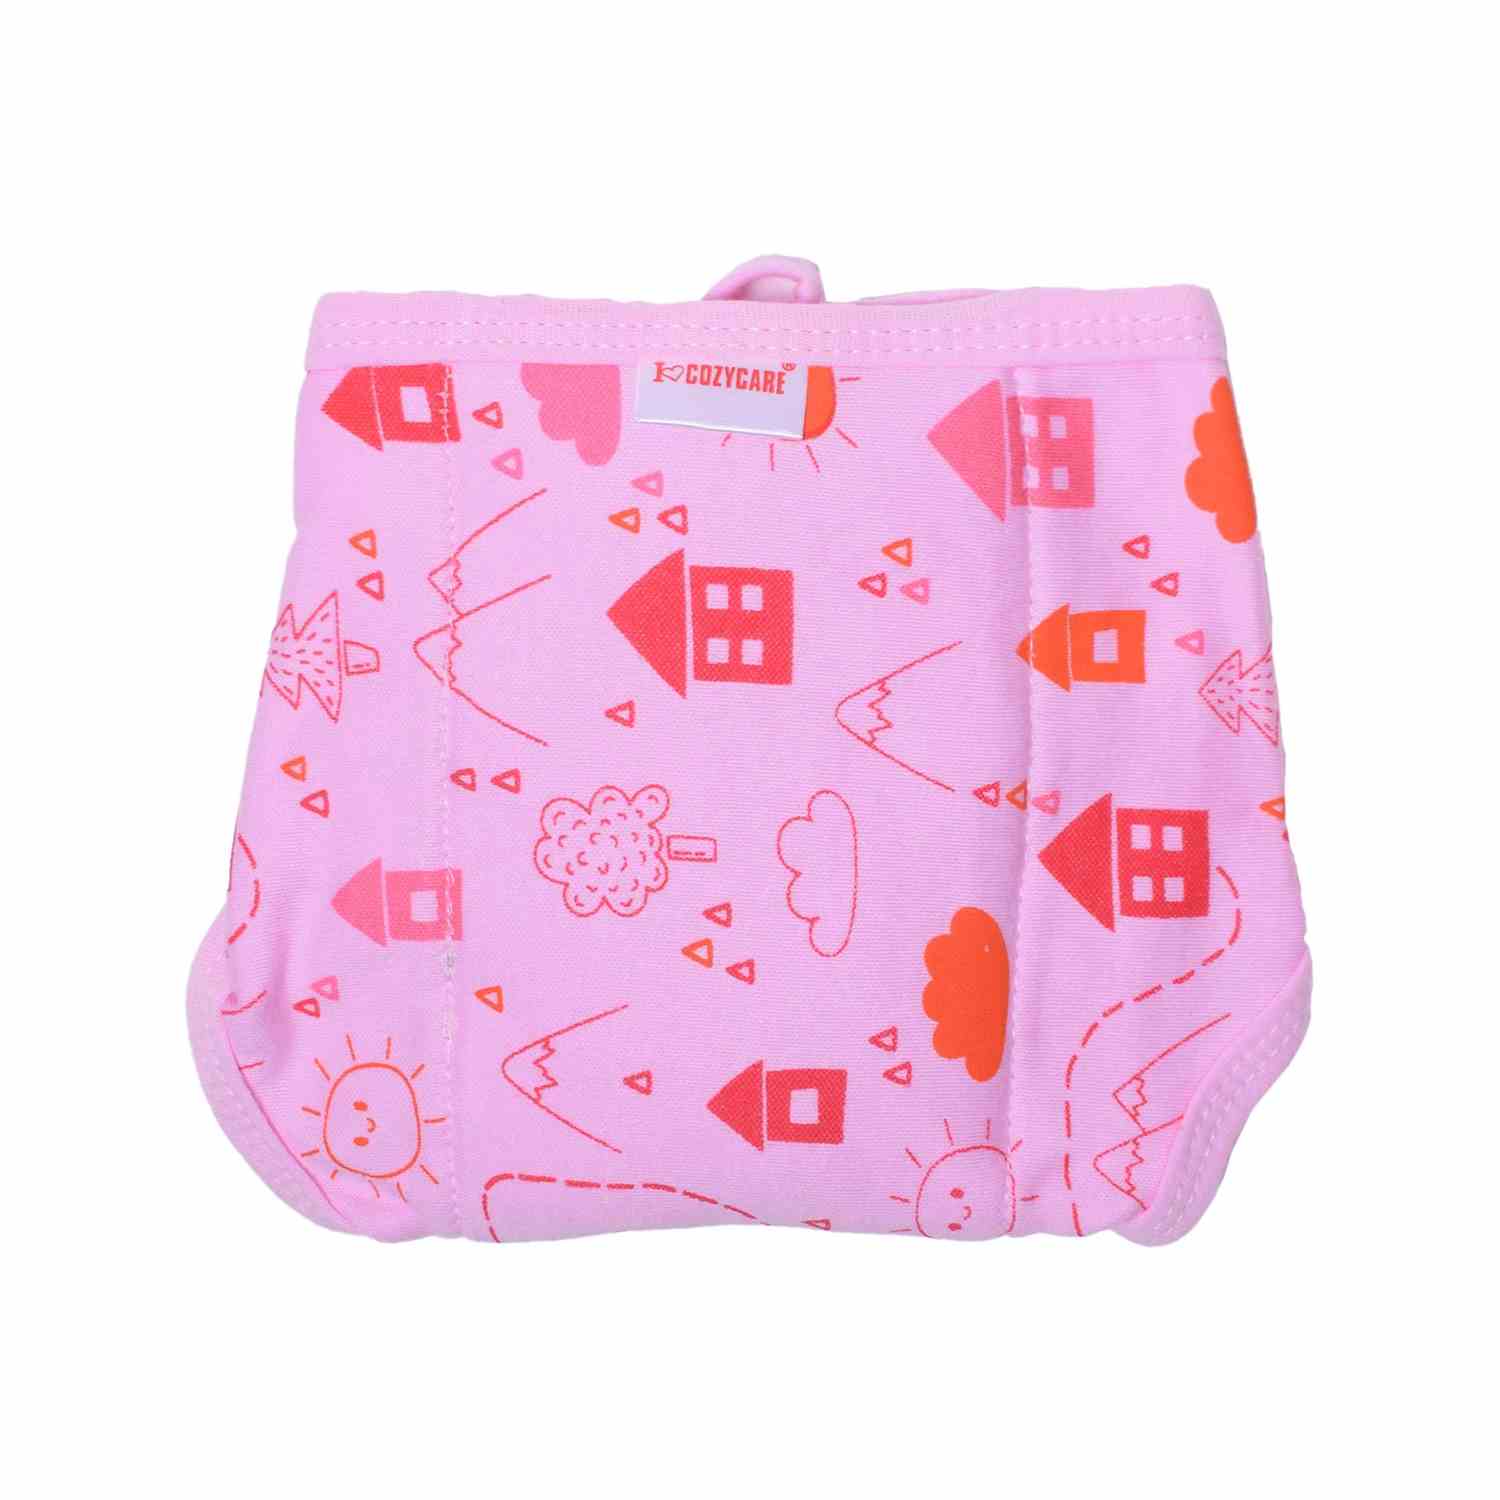 COZYCARE Washable Diapers Hosiery Tying Model House Print Yellow, Pink & Penguin Print Blue 3P Set (XS)